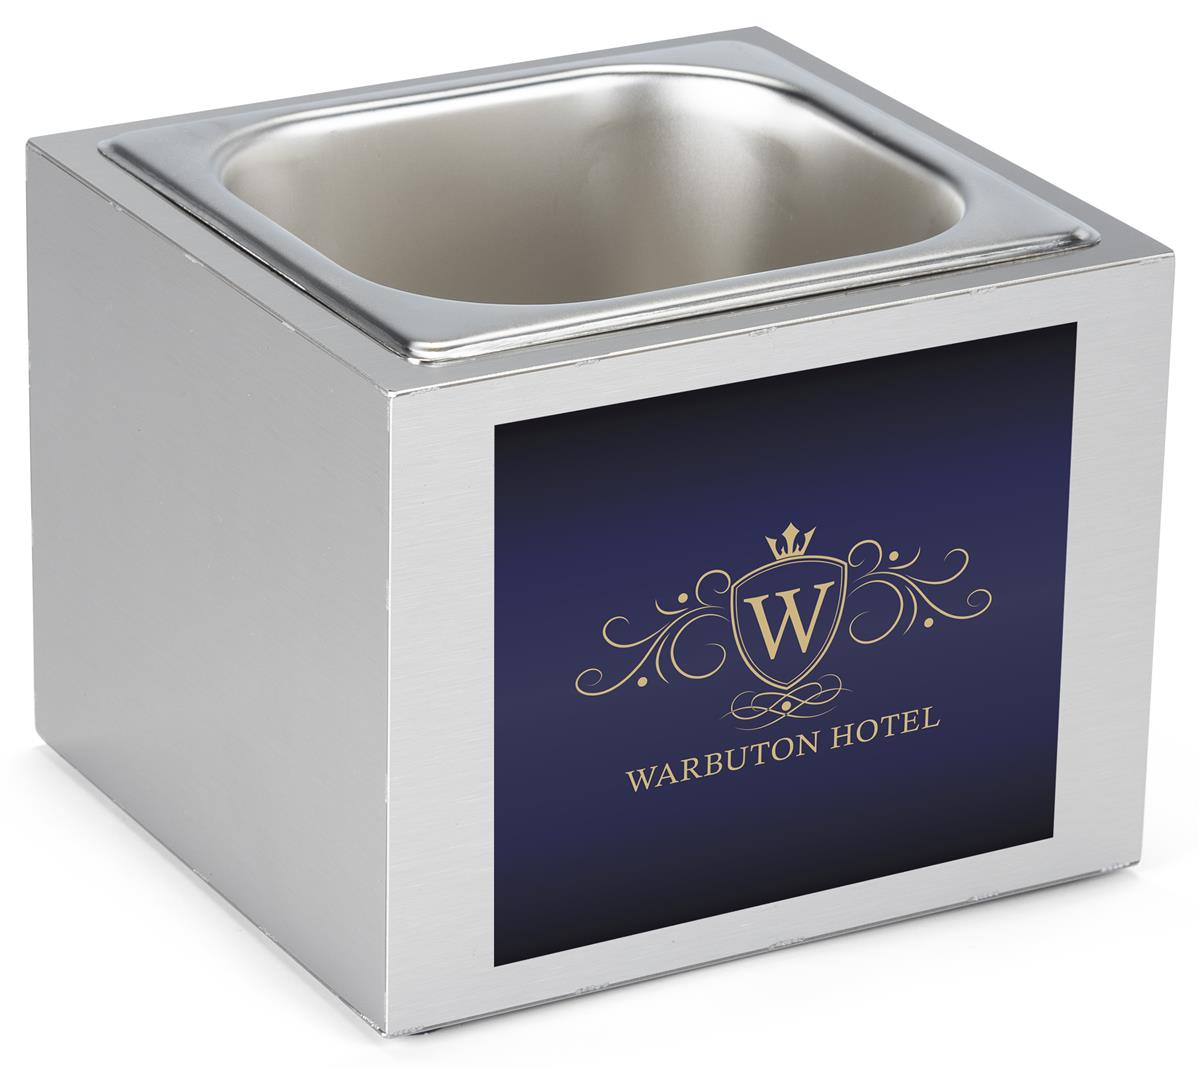 Branded steel countertop ice bin with personal graphics